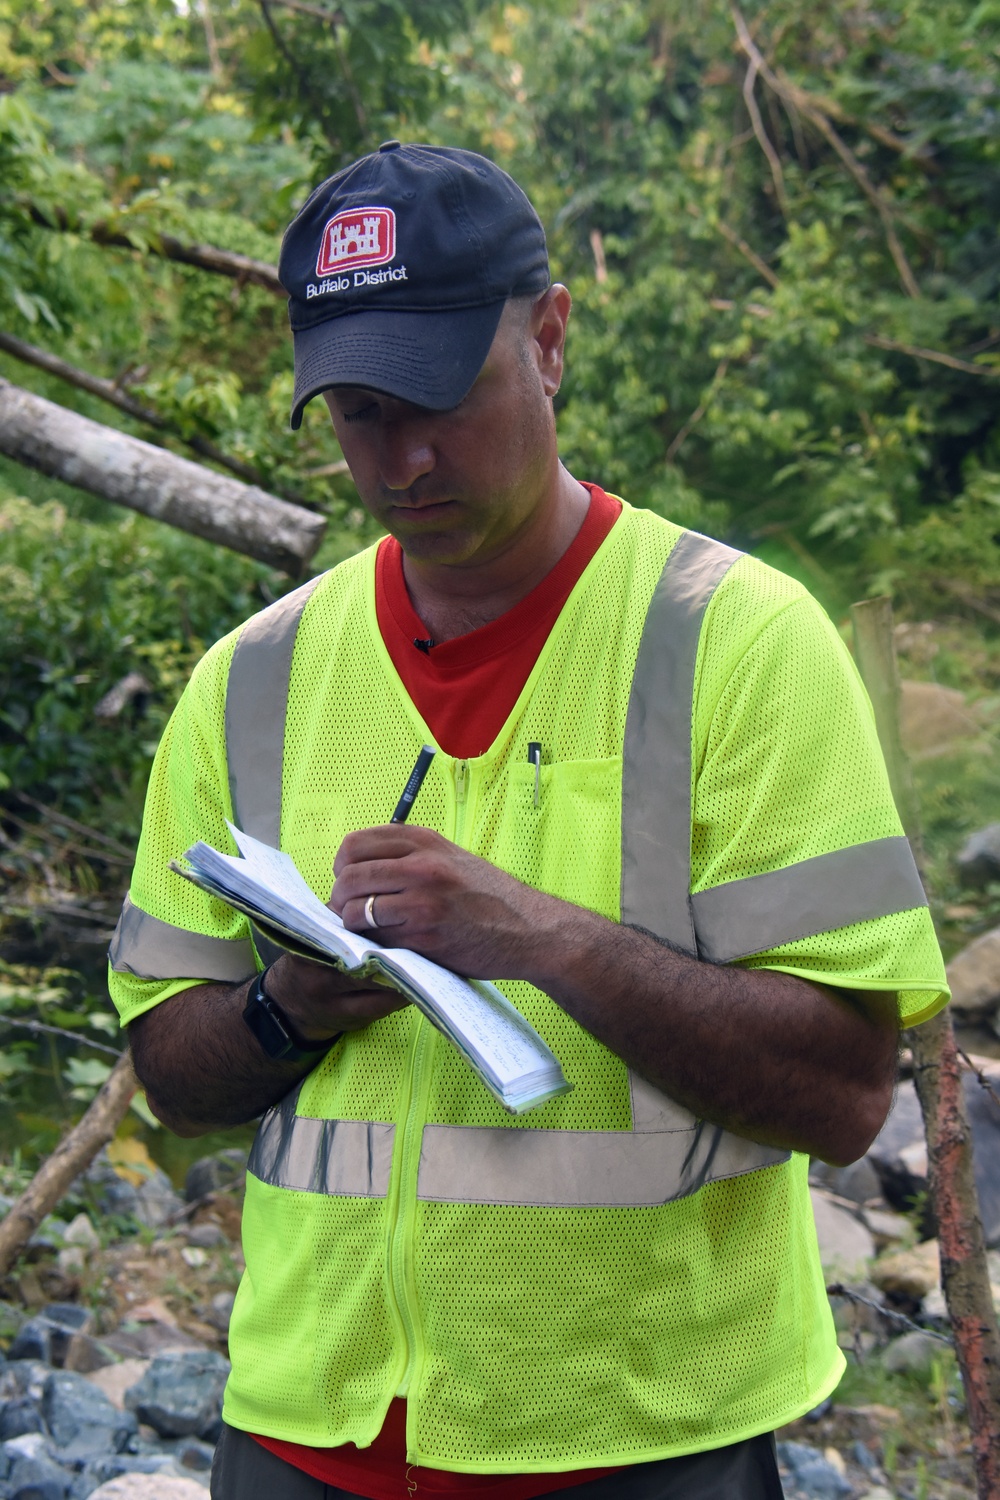 USACE environmental specialists monitor restoration efforts to protect habitat